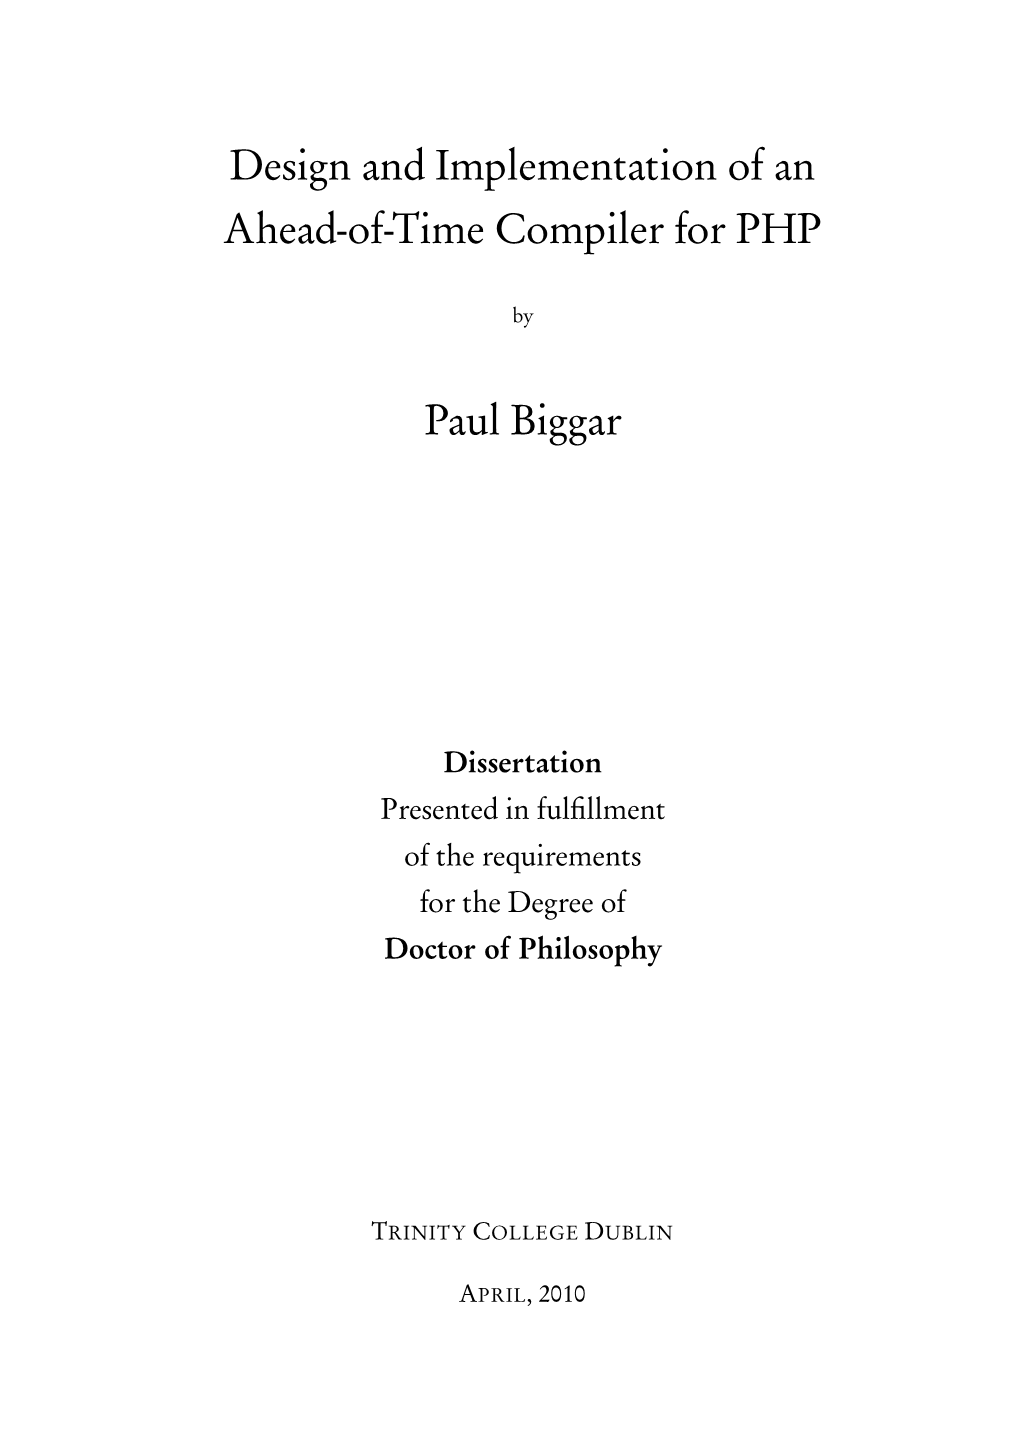 Dissertation Presented in Fulﬁllment of the Requirements for the Degree of Doctor of Philosophy